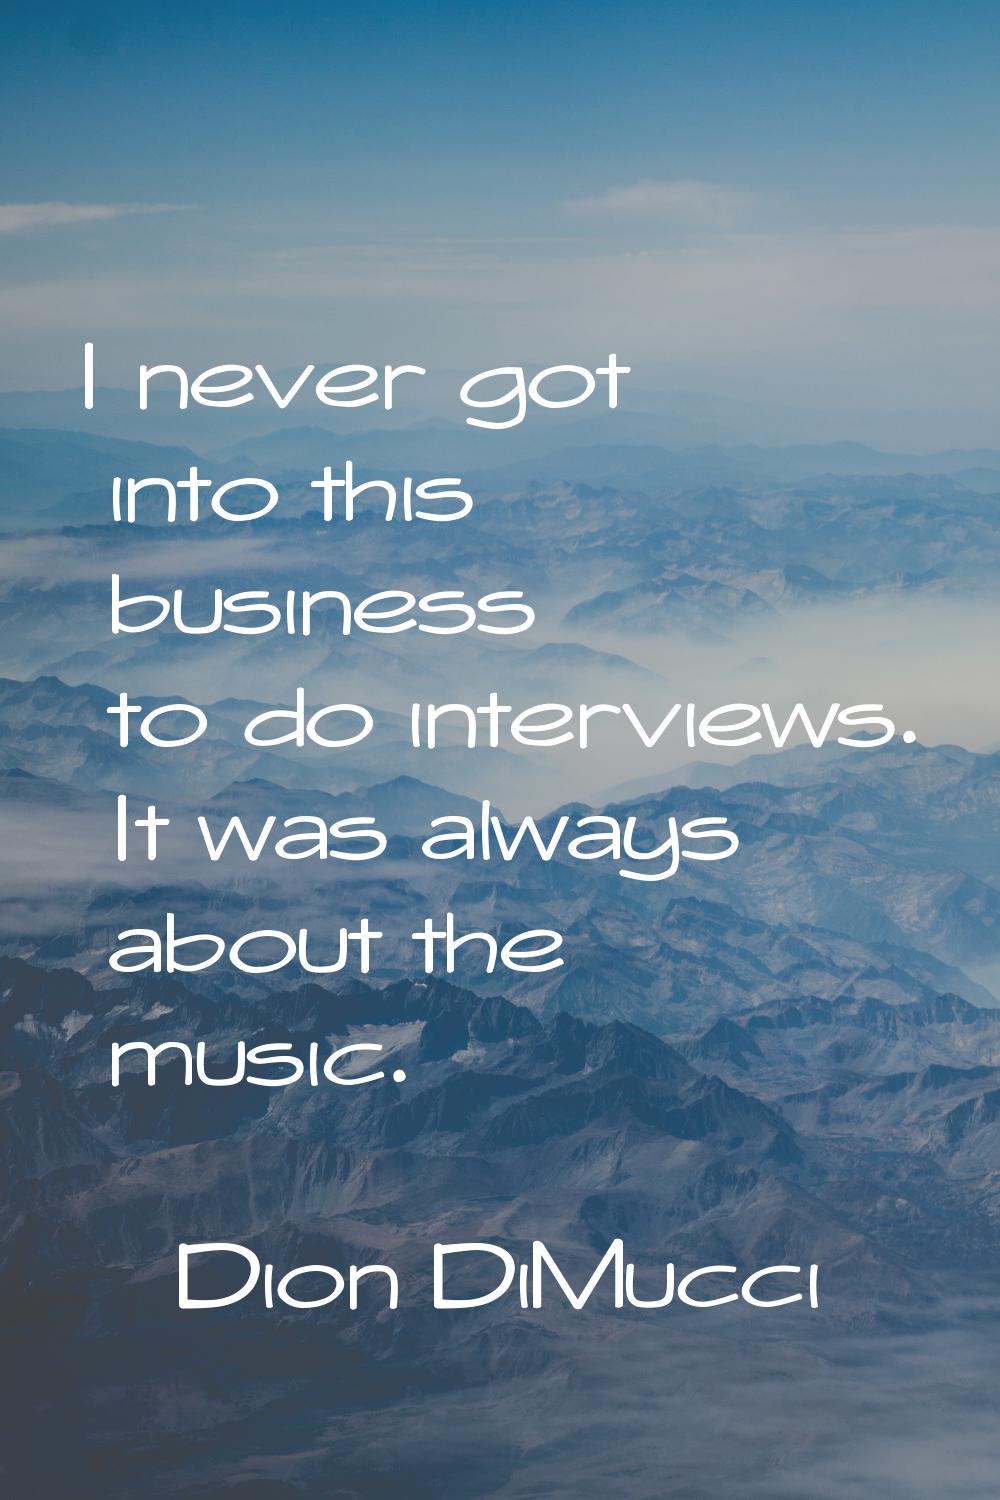 I never got into this business to do interviews. It was always about the music.